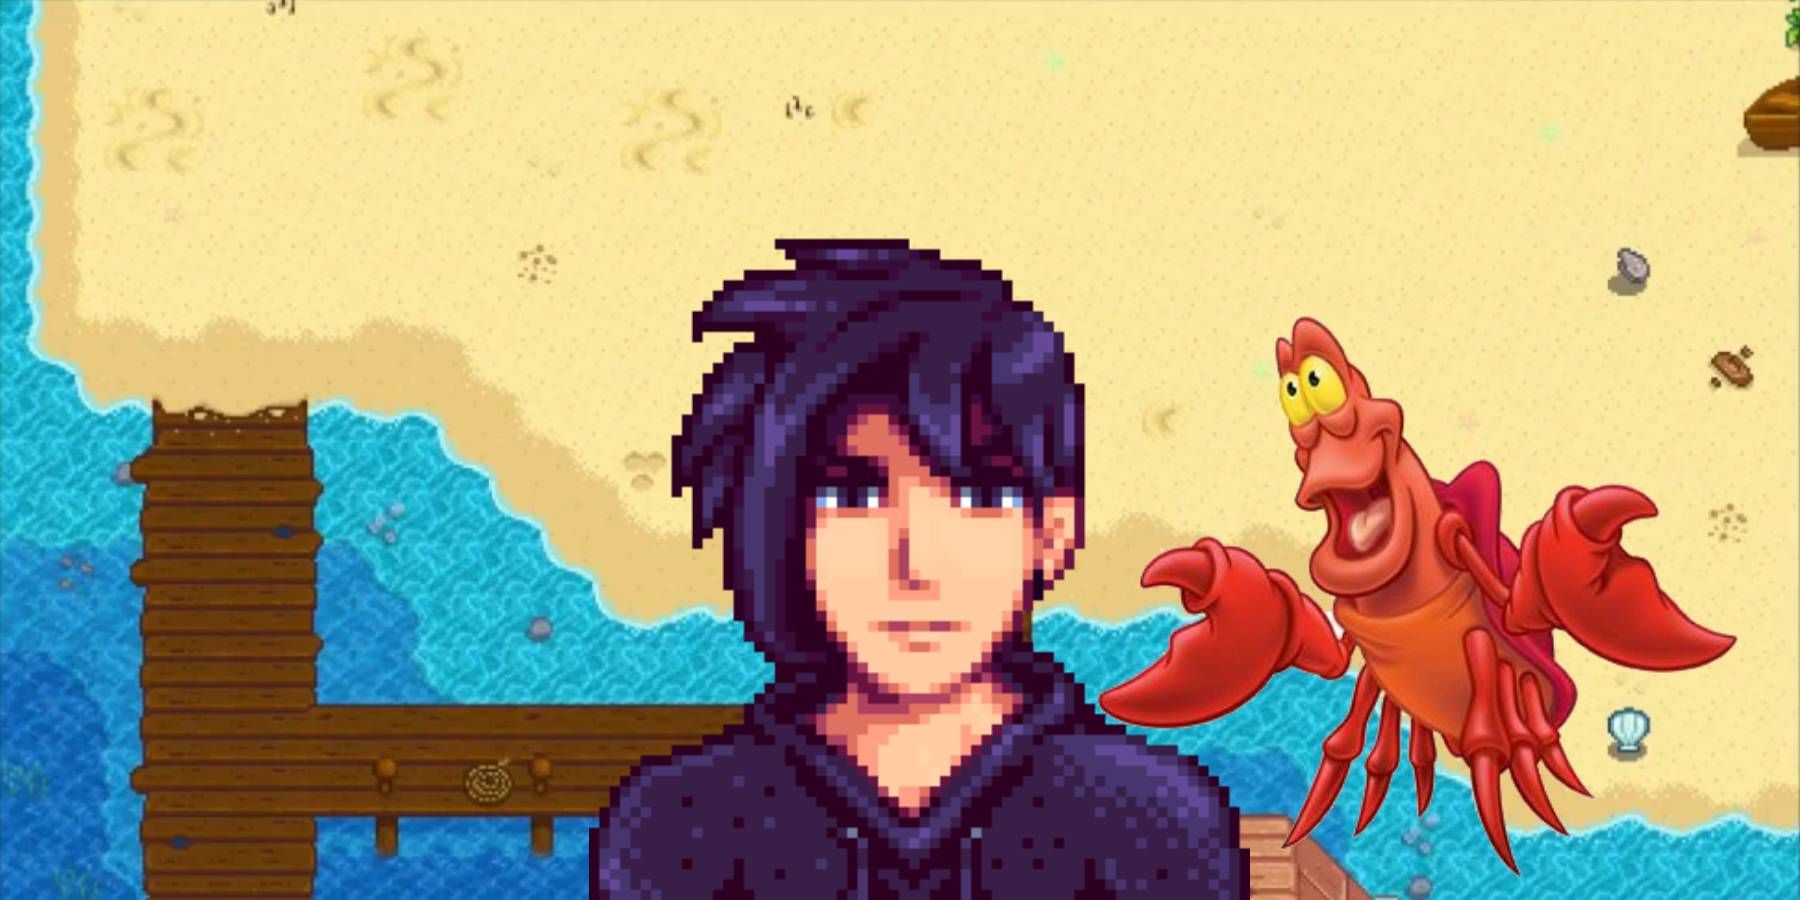 Sebastian from Stardew Valley at the beach with Sebastian from The Little Mermaid